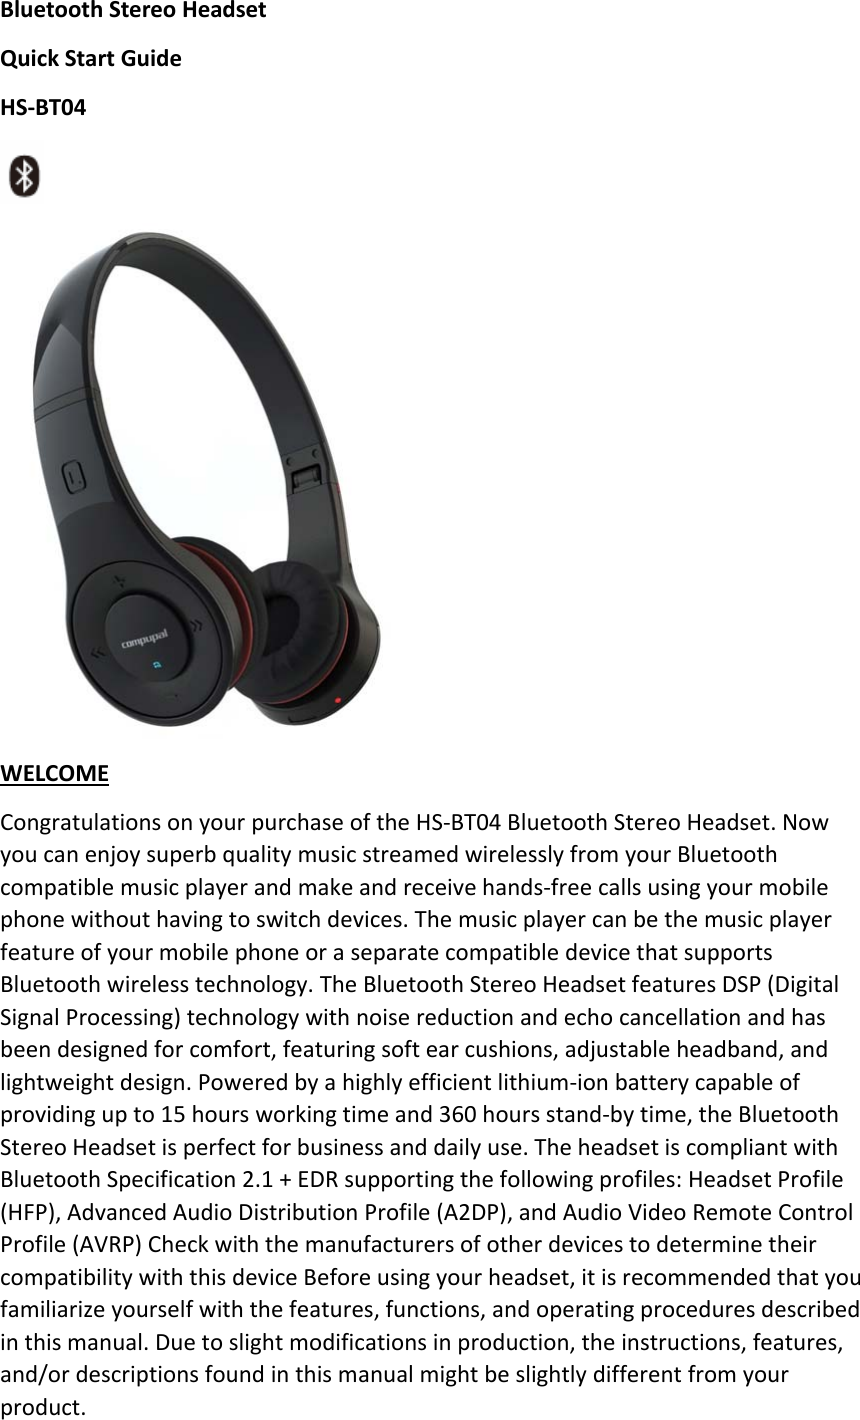 BluetoothStereoHeadsetQuickStartGuideHS‐BT04  WELCOMECongratulationsonyourpurchaseoftheHS‐BT04BluetoothStereoHeadset.NowyoucanenjoysuperbqualitymusicstreamedwirelesslyfromyourBluetoothcompatiblemusicplayerandmakeandreceivehands‐freecallsusingyourmobilephonewithouthavingtoswitchdevices.ThemusicplayercanbethemusicplayerfeatureofyourmobilephoneoraseparatecompatibledevicethatsupportsBluetoothwirelesstechnology.TheBluetoothStereoHeadsetfeaturesDSP(DigitalSignalProcessing)technologywithnoisereductionandechocancellationandhasbeendesignedforcomfort,featuringsoftearcushions,adjustableheadband,andlightweightdesign.Poweredbyahighlyefficientlithium‐ionbatterycapableofprovidingupto15hoursworkingtimeand360hoursstand‐bytime,theBluetoothStereoHeadsetisperfectforbusinessanddailyuse.TheheadsetiscompliantwithBluetoothSpecification2.1+EDRsupportingthefollowingprofiles:HeadsetProfile(HFP),AdvancedAudioDistributionProfile(A2DP),andAudioVideoRemoteControlProfile(AVRP)CheckwiththemanufacturersofotherdevicestodeterminetheircompatibilitywiththisdeviceBeforeusingyourheadset,itisrecommendedthatyoufamiliarizeyourselfwiththefeatures,functions,andoperatingproceduresdescribedinthismanual.Duetoslightmodificationsinproduction,theinstructions,features,and/ordescriptionsfoundinthismanualmightbeslightlydifferentfromyourproduct.